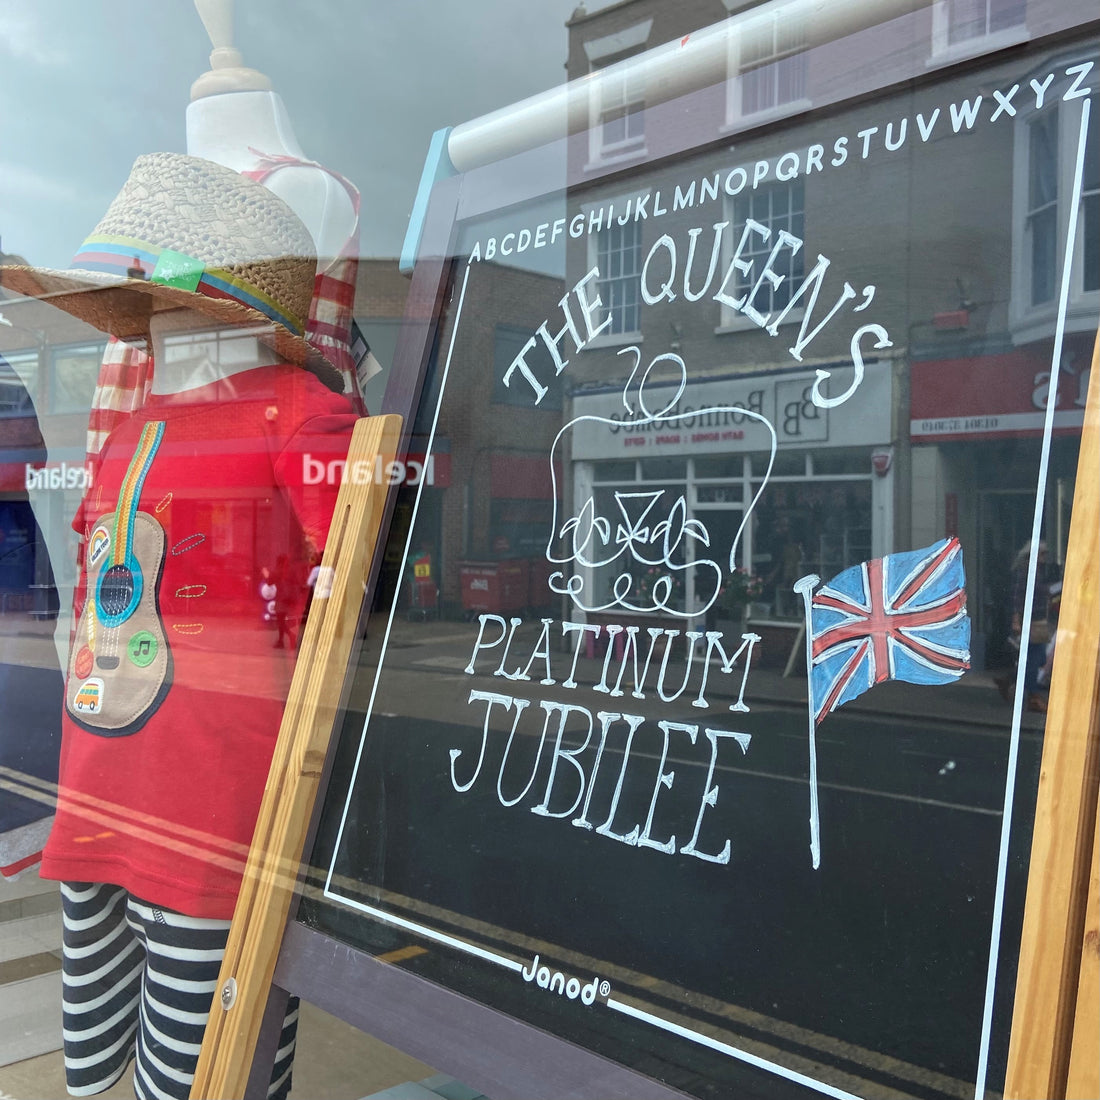 manequin wearing red white and blue outfit and blackboard featuring a platinum jubilee logo in a shop window